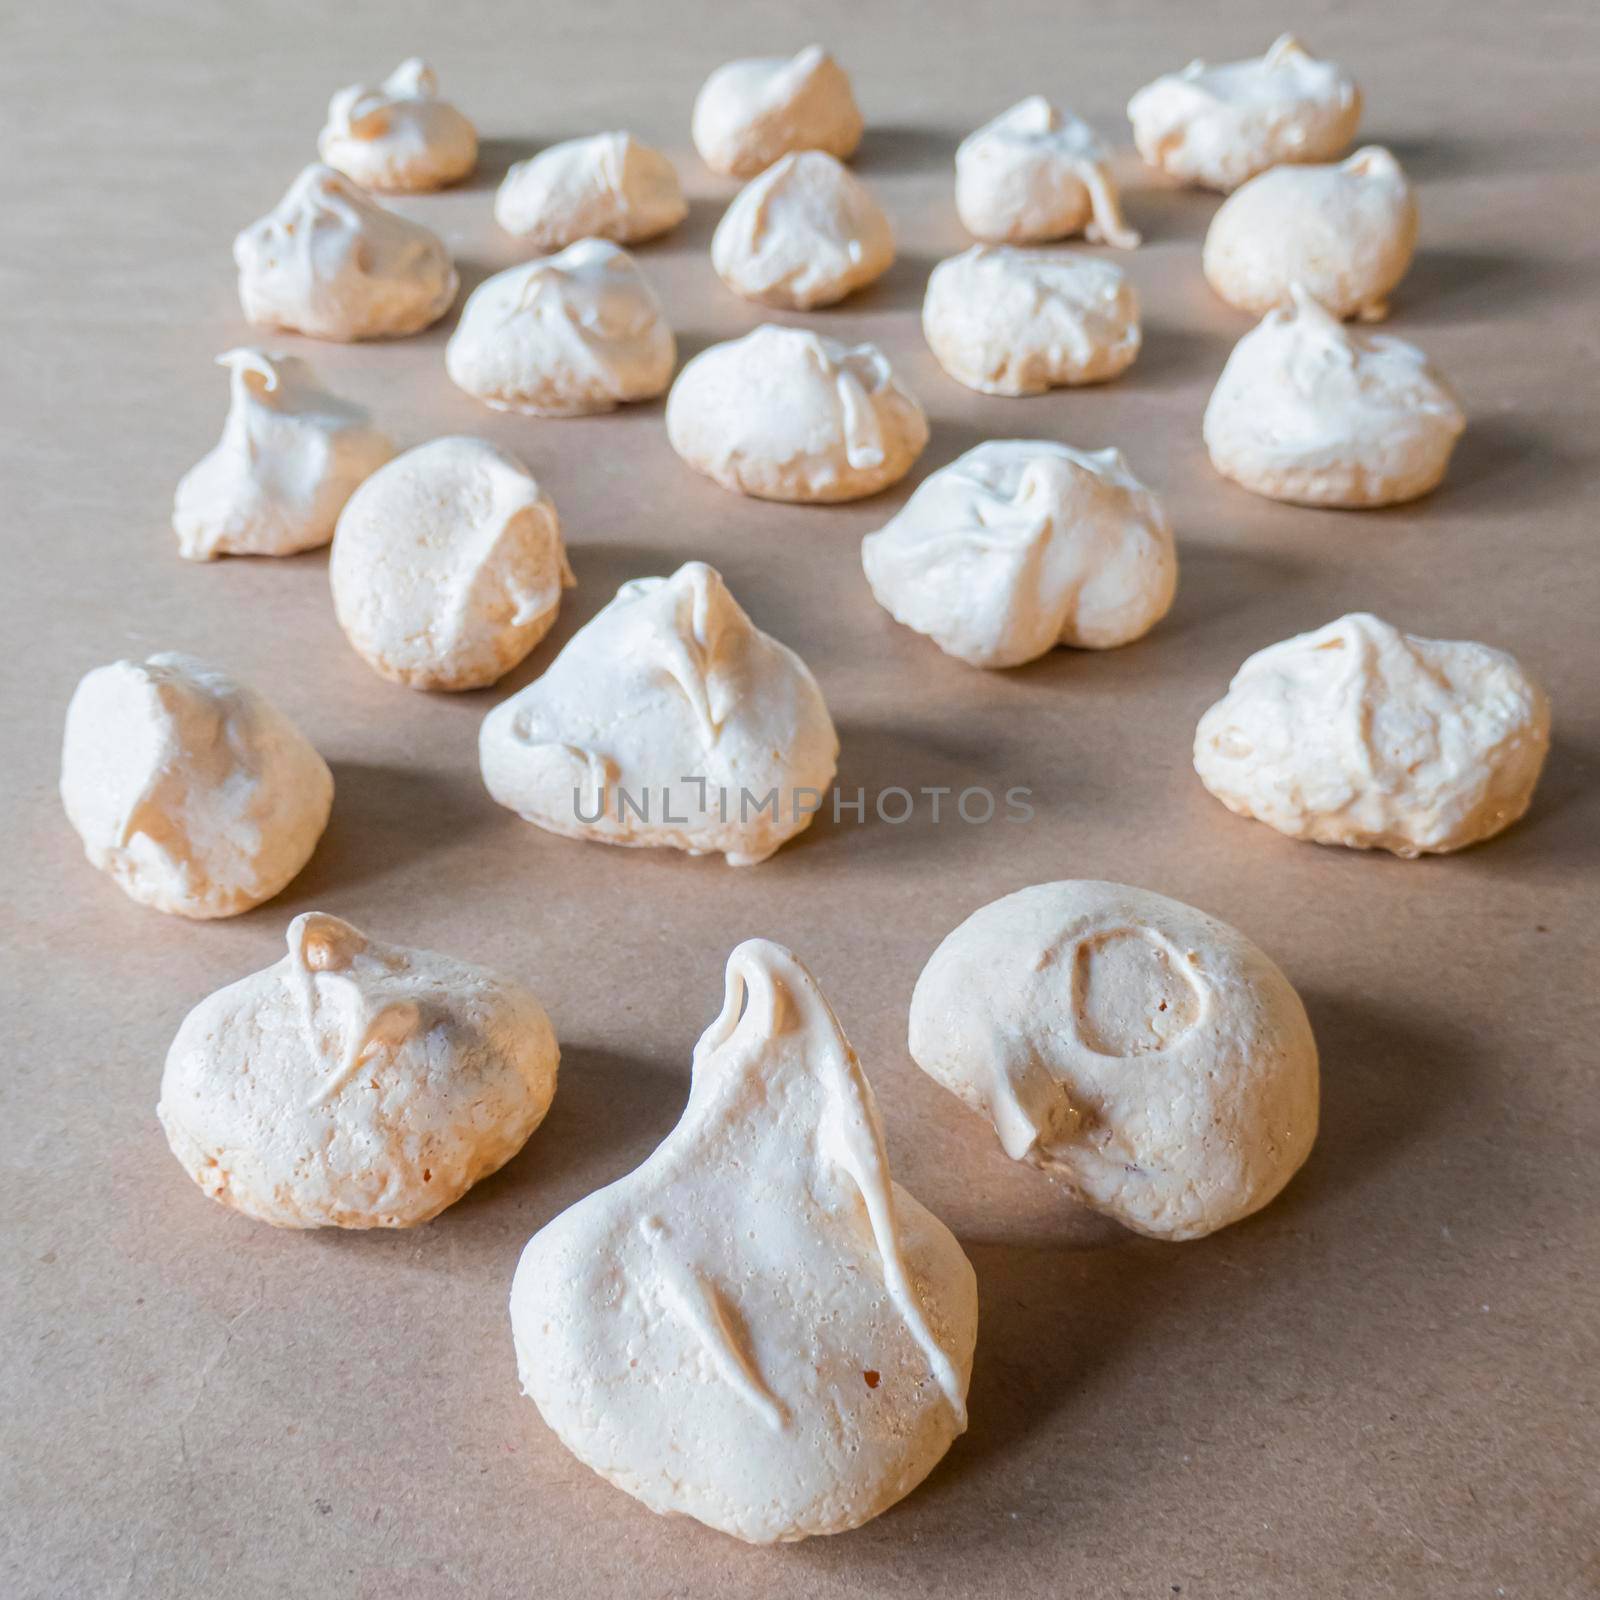 Homemade french milk-colored meringues on crumpled craft paper. flatley composition: delicious homemade meringues on craft paper